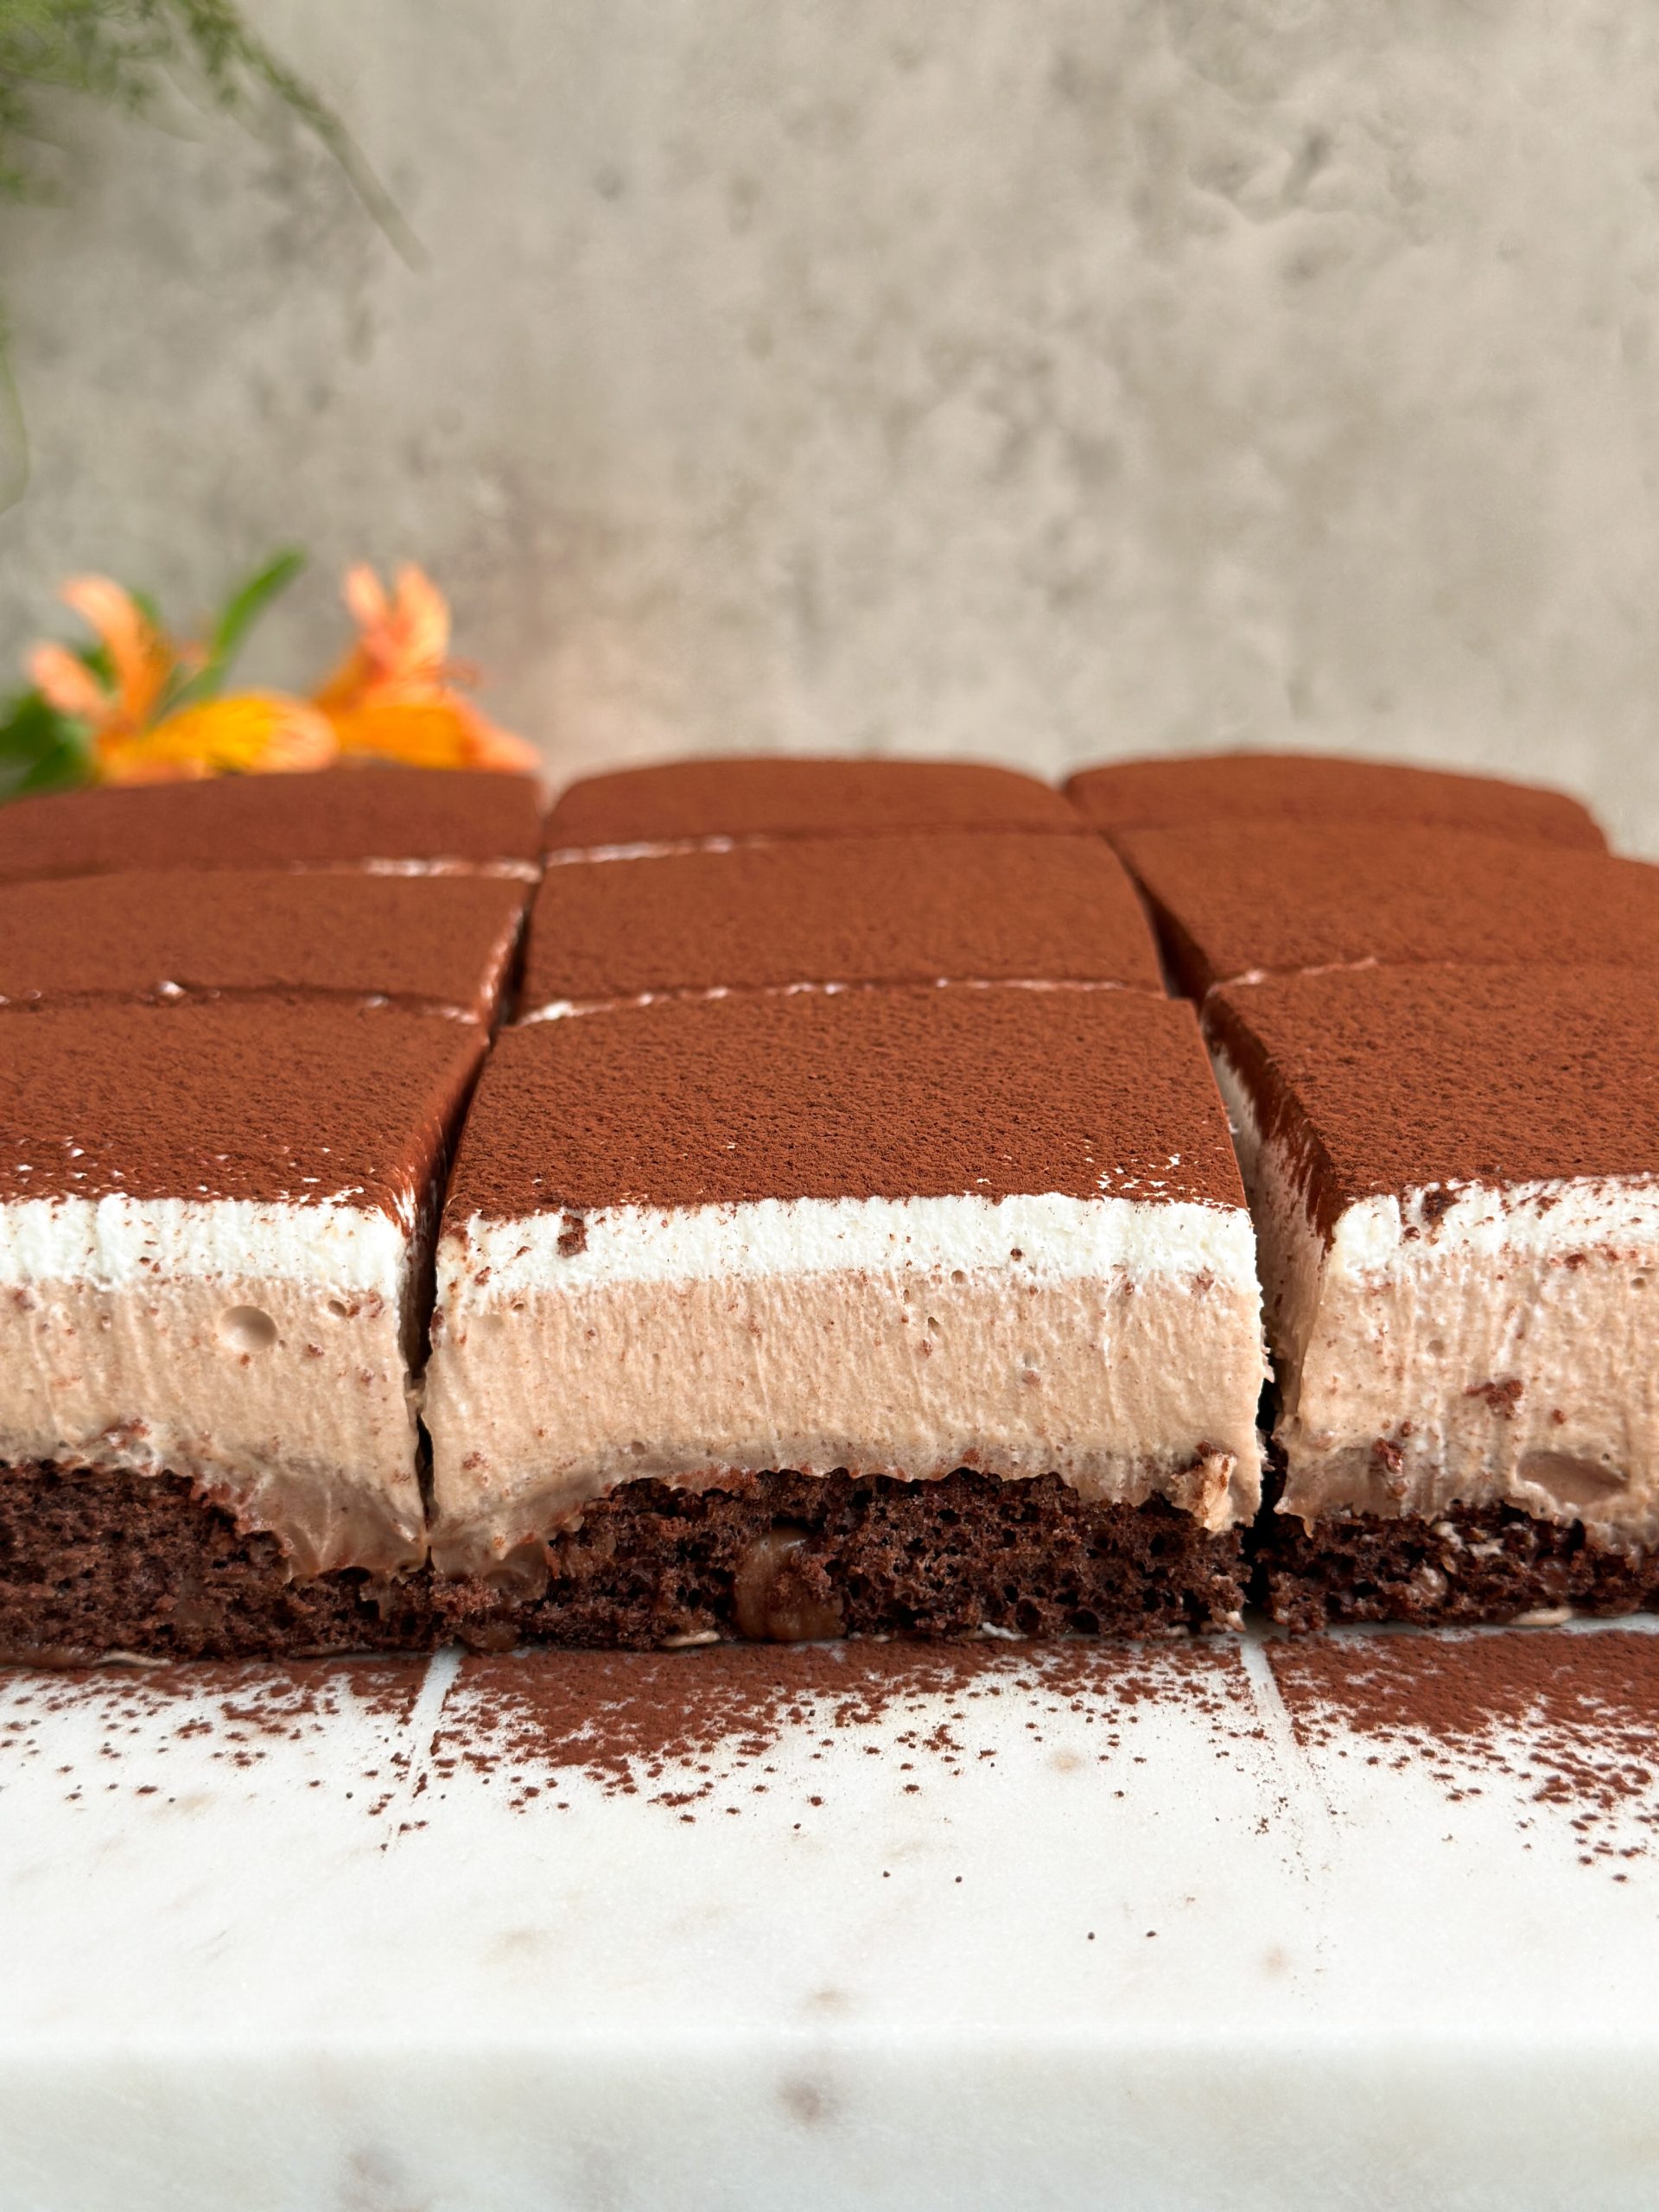 close up of layered chocolate mousse cake slices showing layer of cake, mousse and whipped cream, covered in cocoa powder